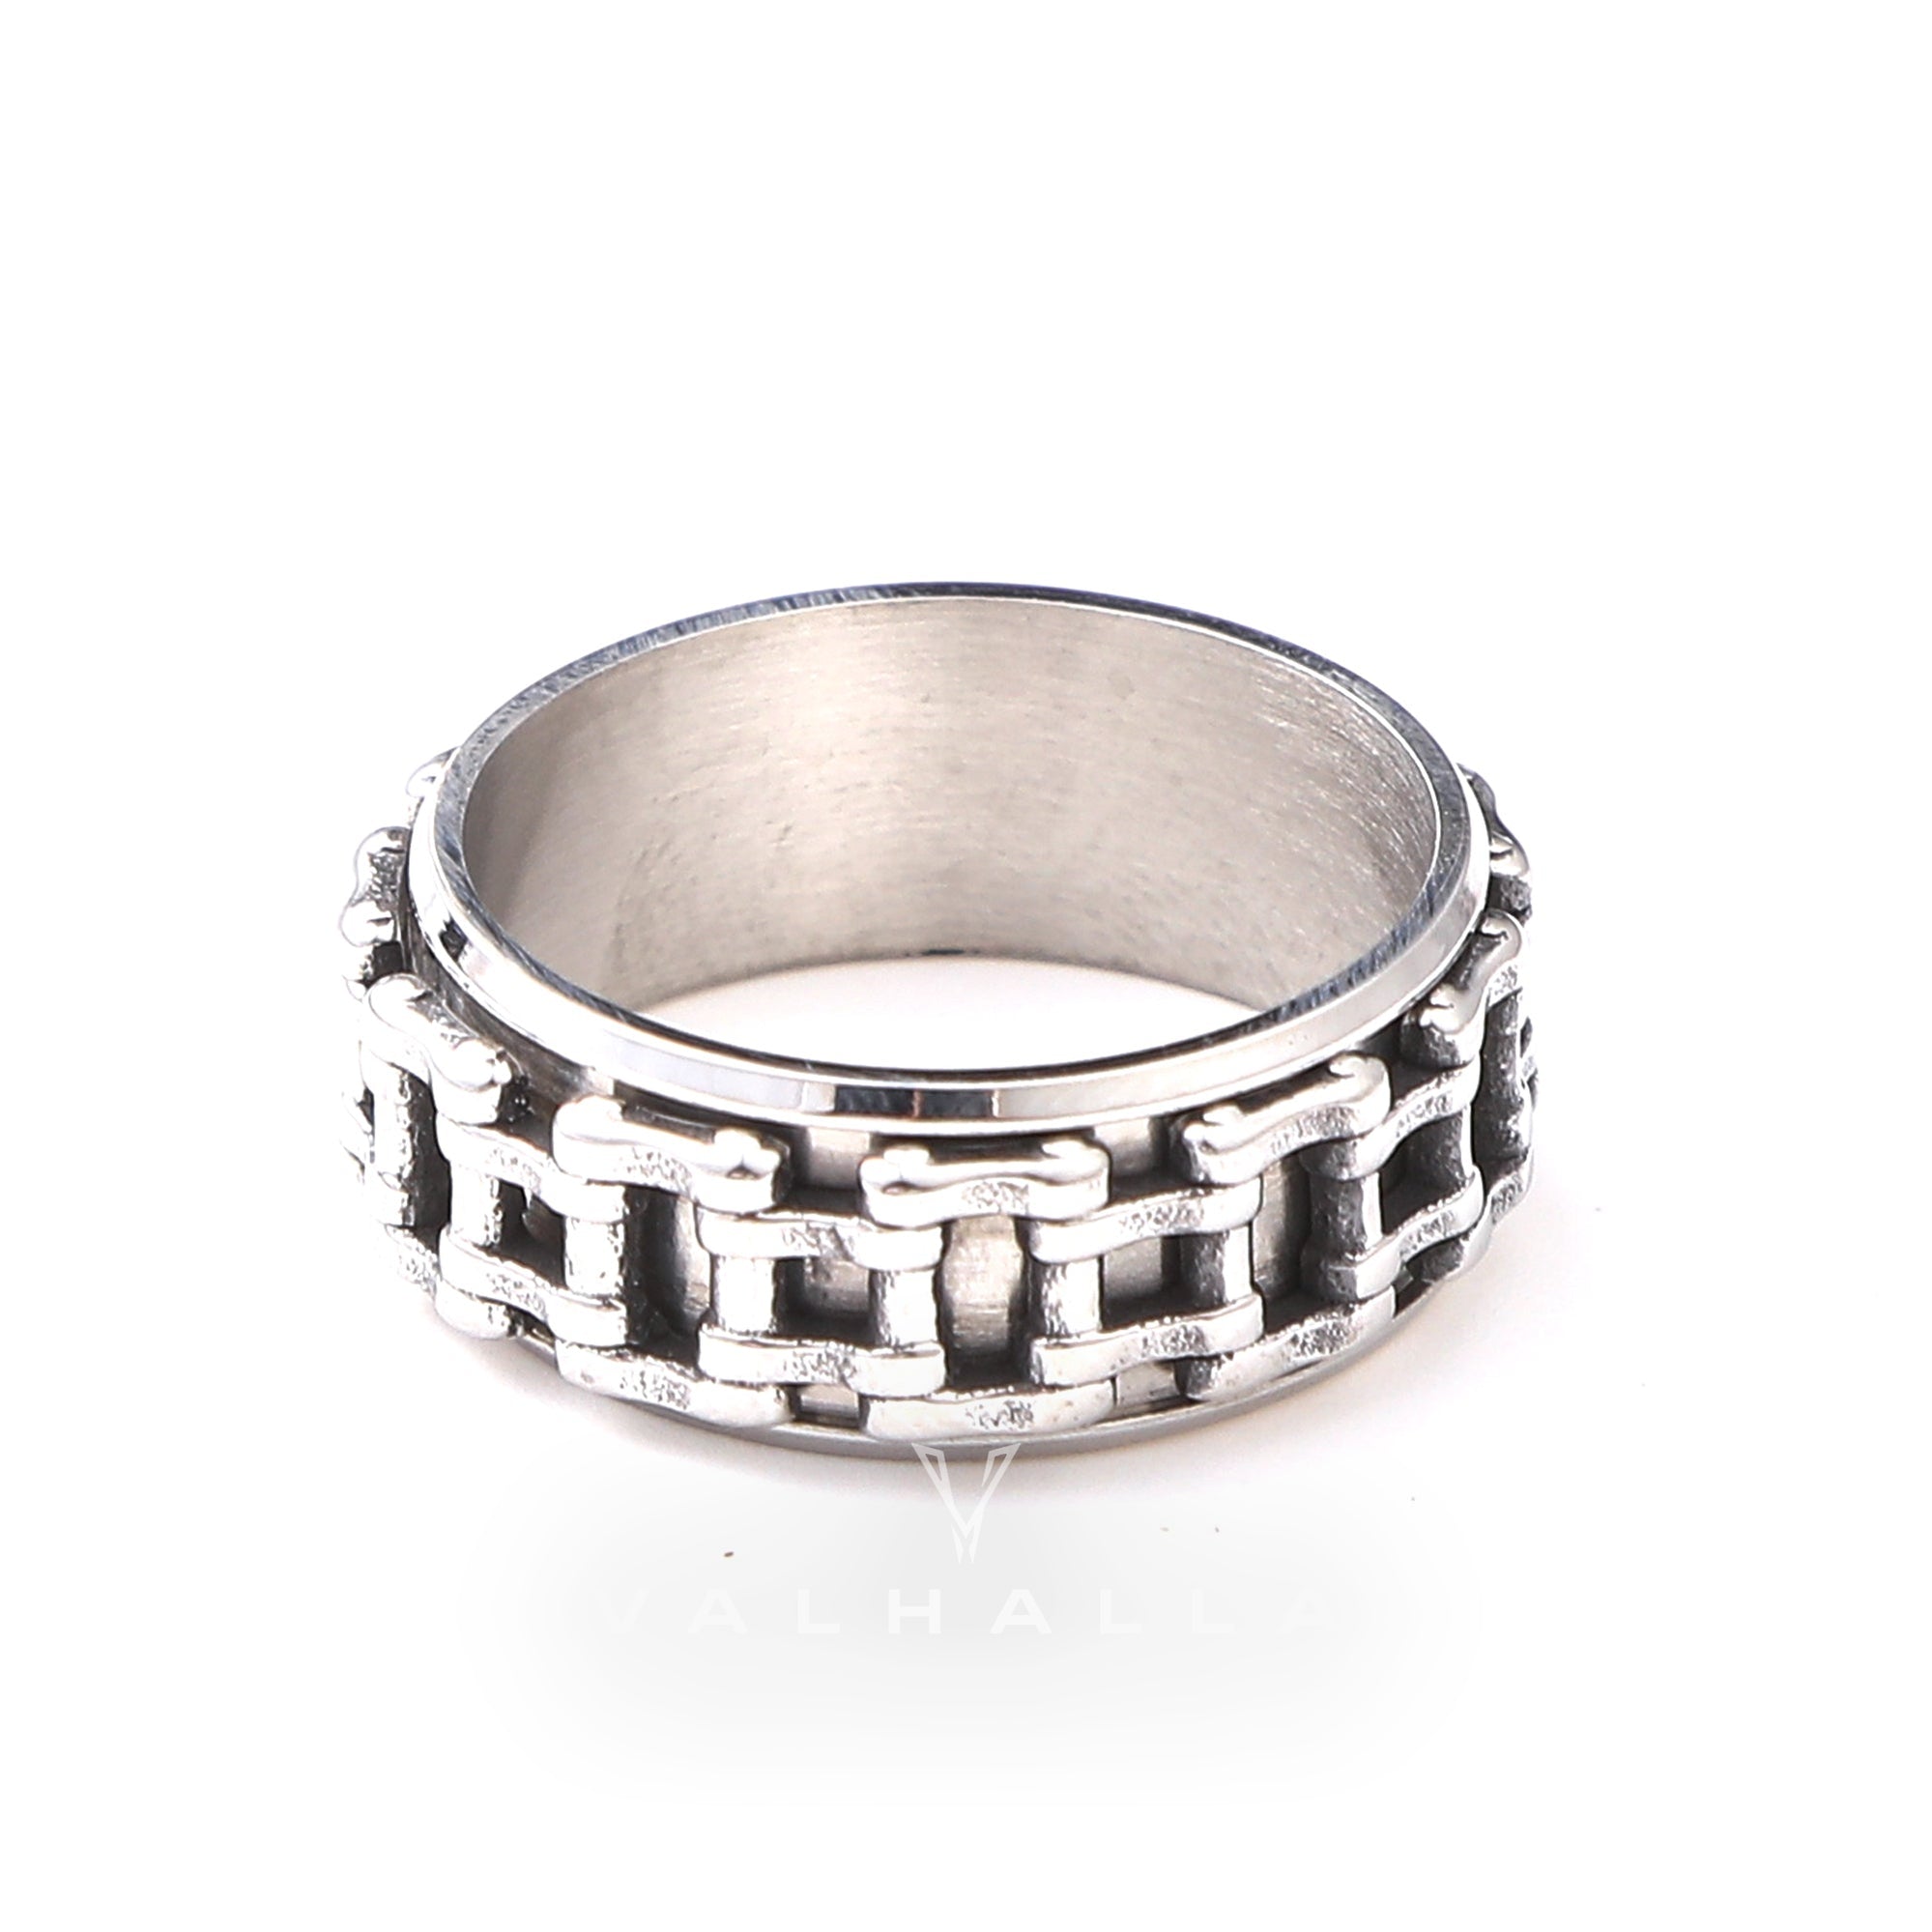 Vintage Motorcycle Chain Stainless Steel Spinner Ring